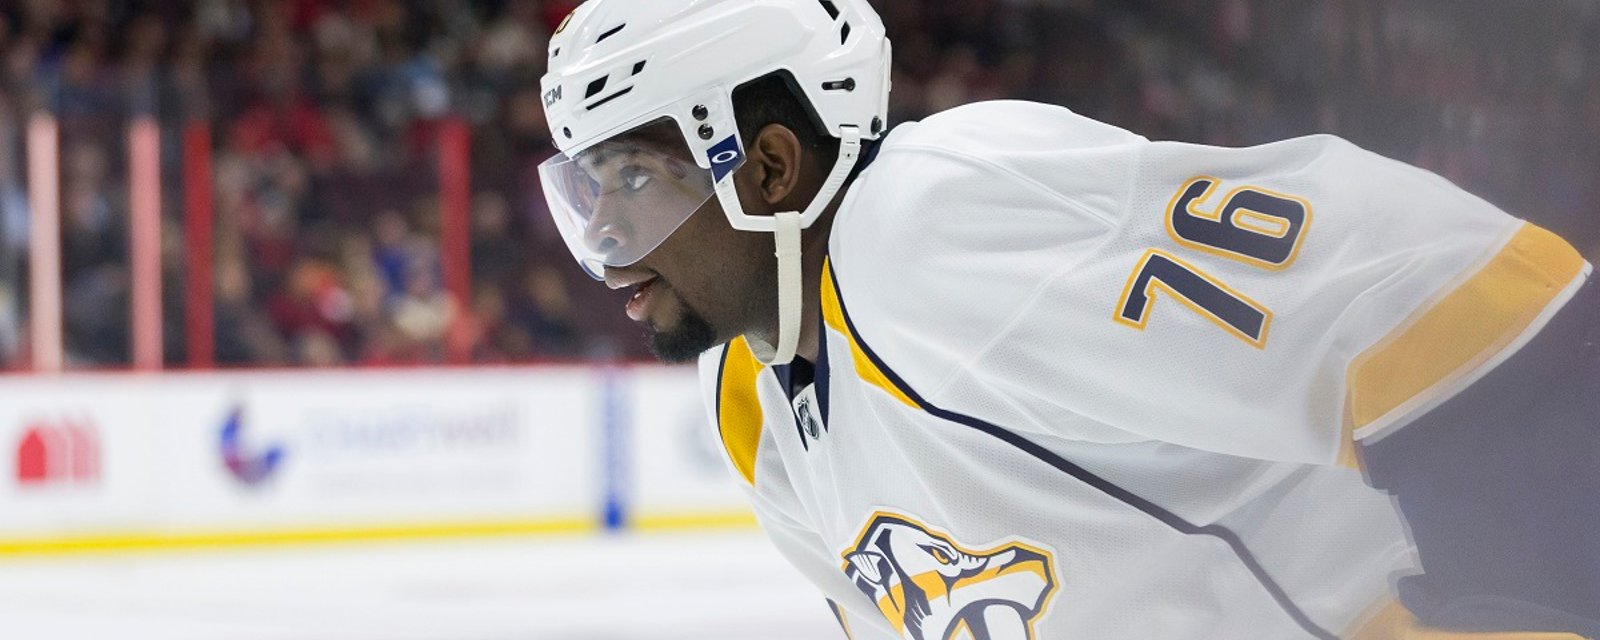 Breaking: P.K. Subban trying to get under the Penguins skin during warmups. 